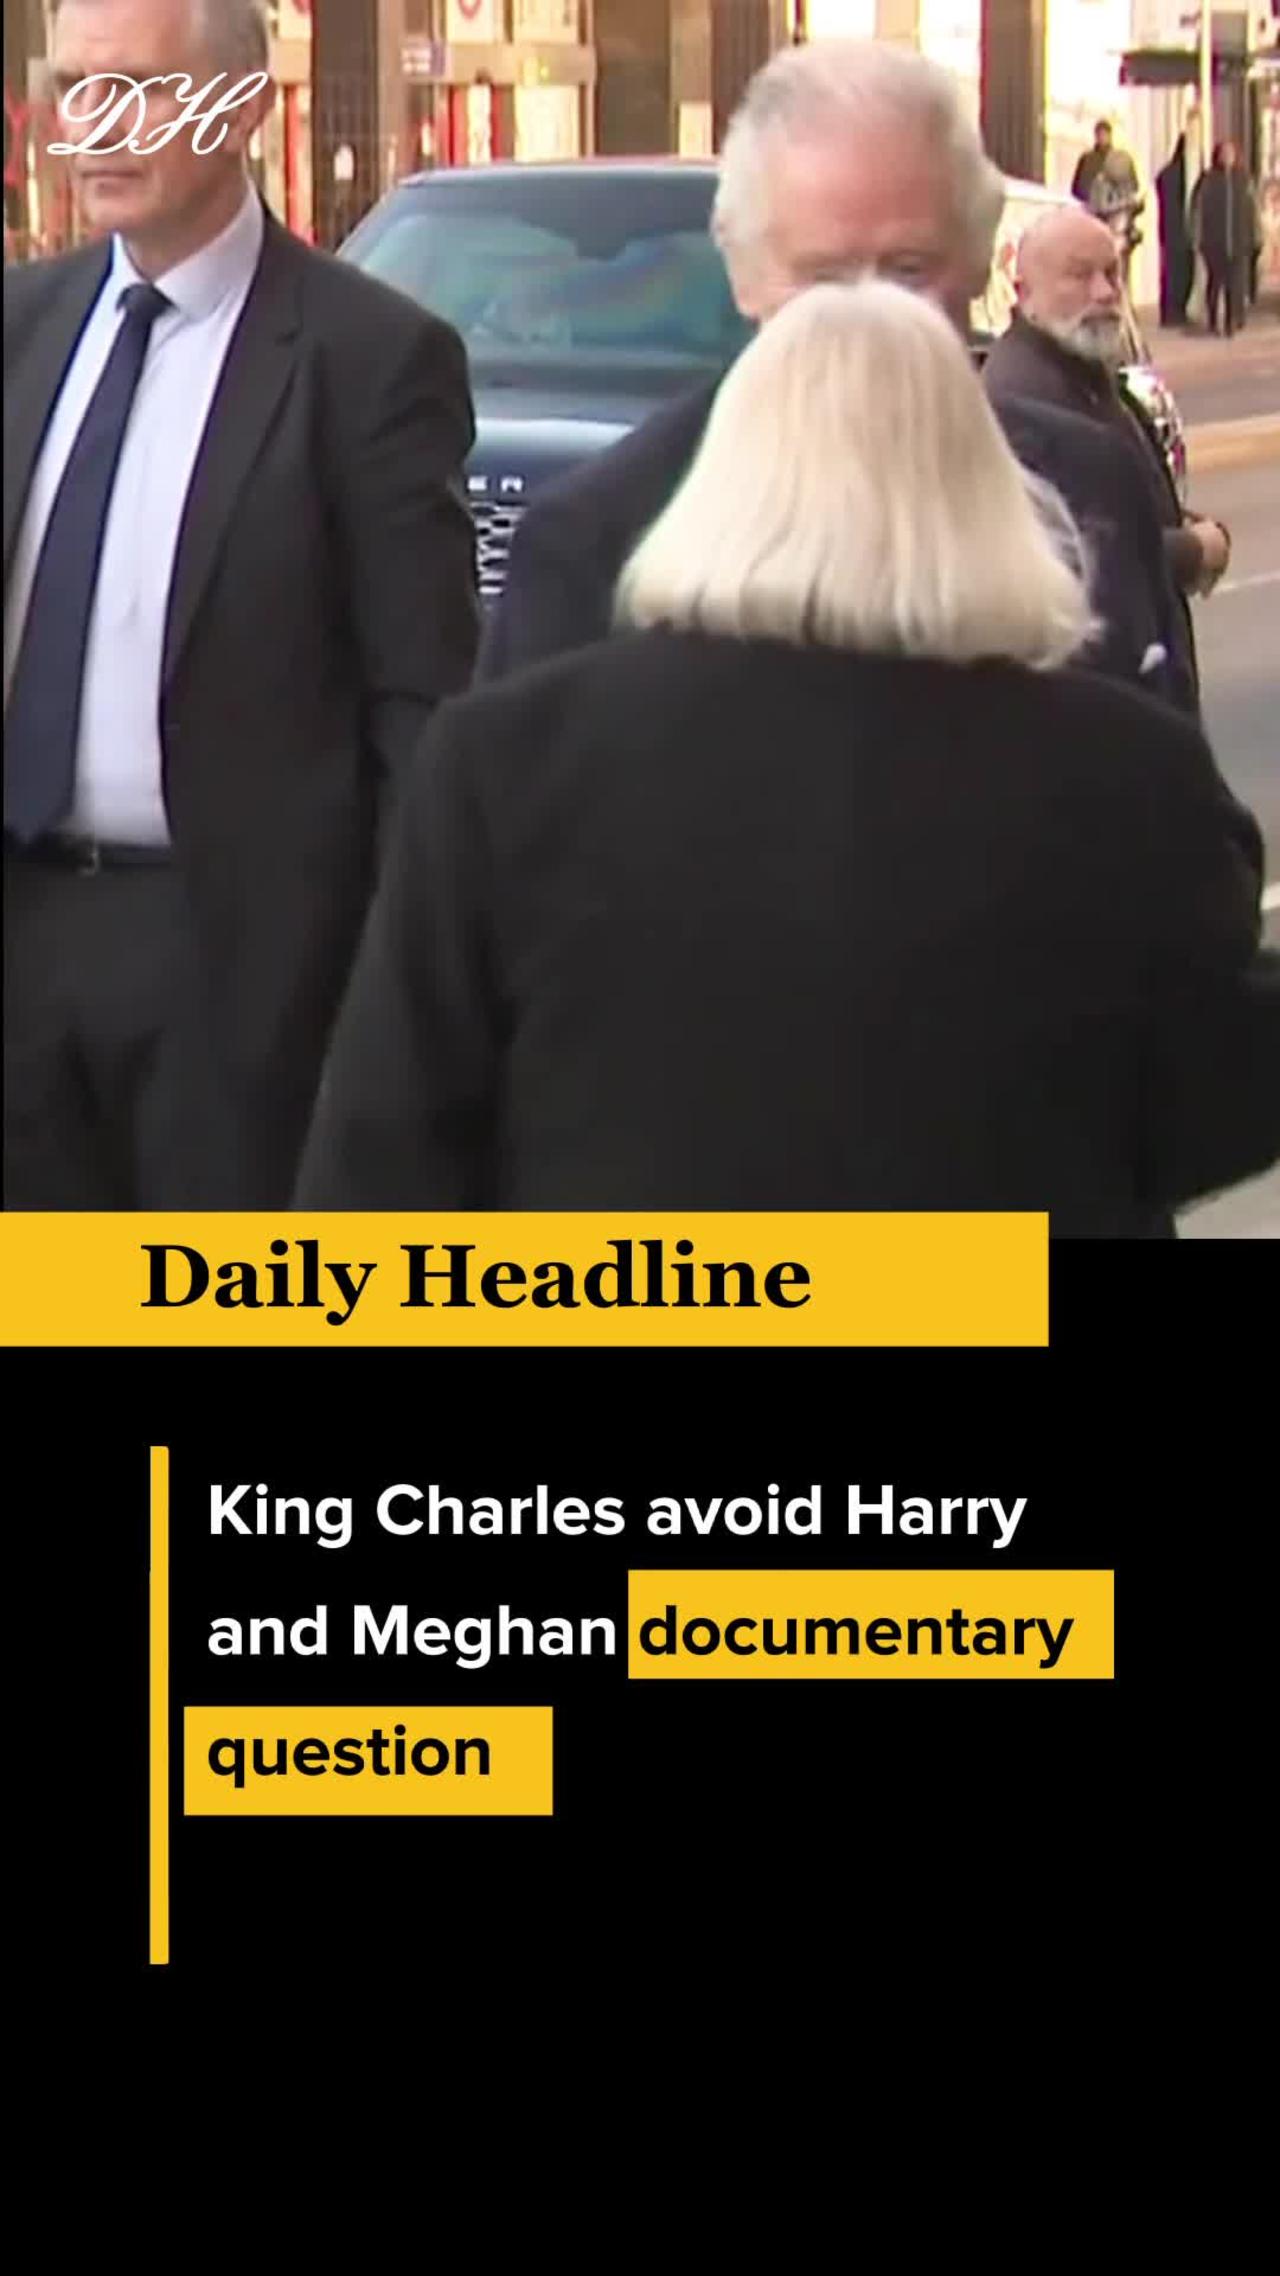 King Charles avoid Harry and Meghan documentary question